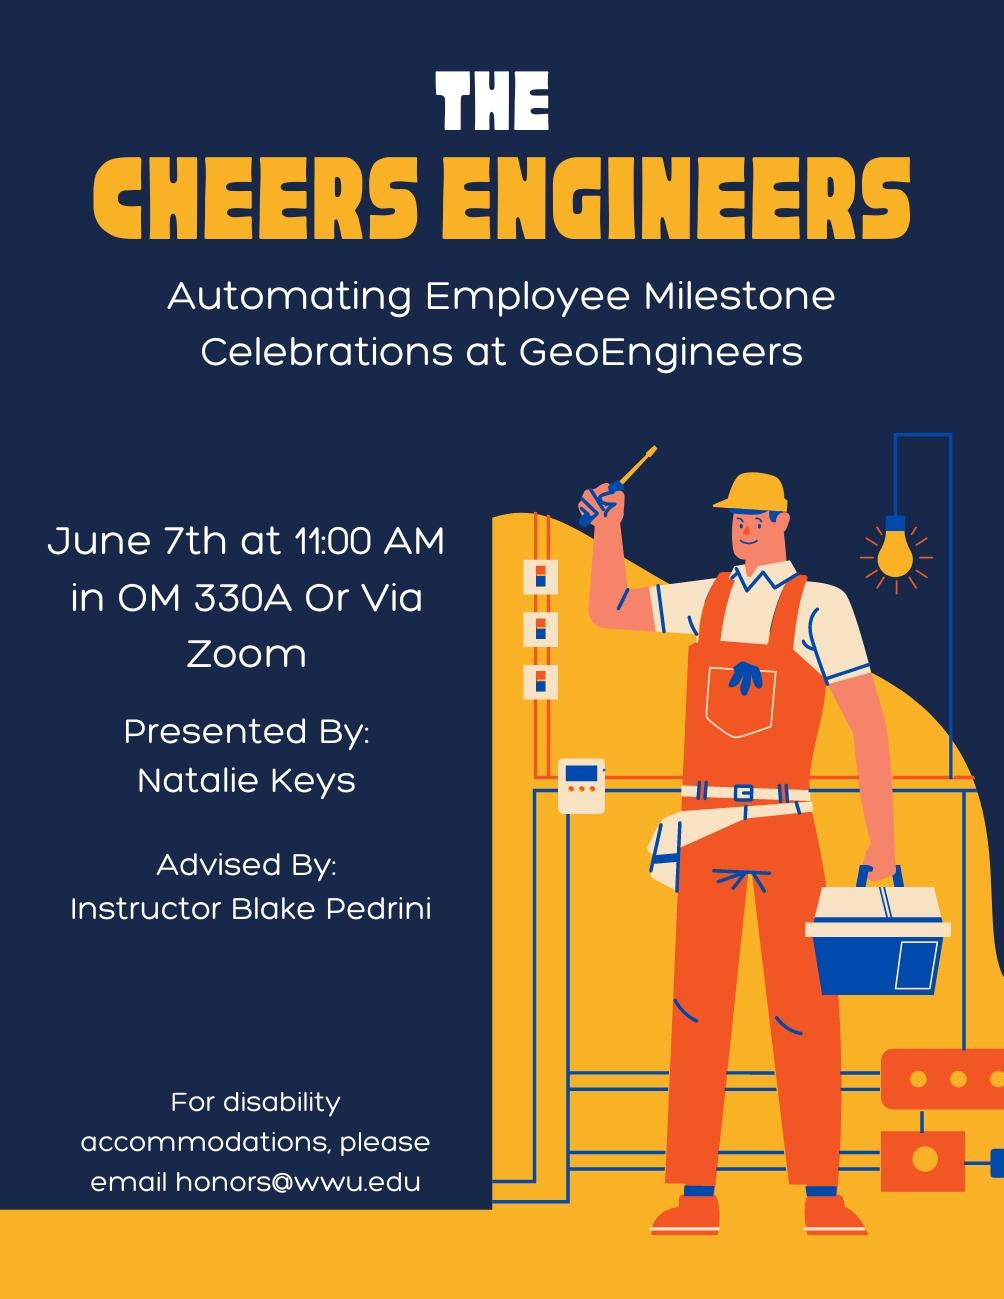 A vibrant orange and blue poster titled "The Cheers Engineers" with a graphic of a male engineer in a yellow hard hat pointing up, beside a blueprint and toolkit. The event, "Automating Employee Milestone Celebrations at GeoEngineers," is on June 7th at 11:00 AM in OM 330A or via Zoom, presented by Natalie Keys and advised by Instructor Blake Perdini. For disability accommodations, email honors@wwu.edu.